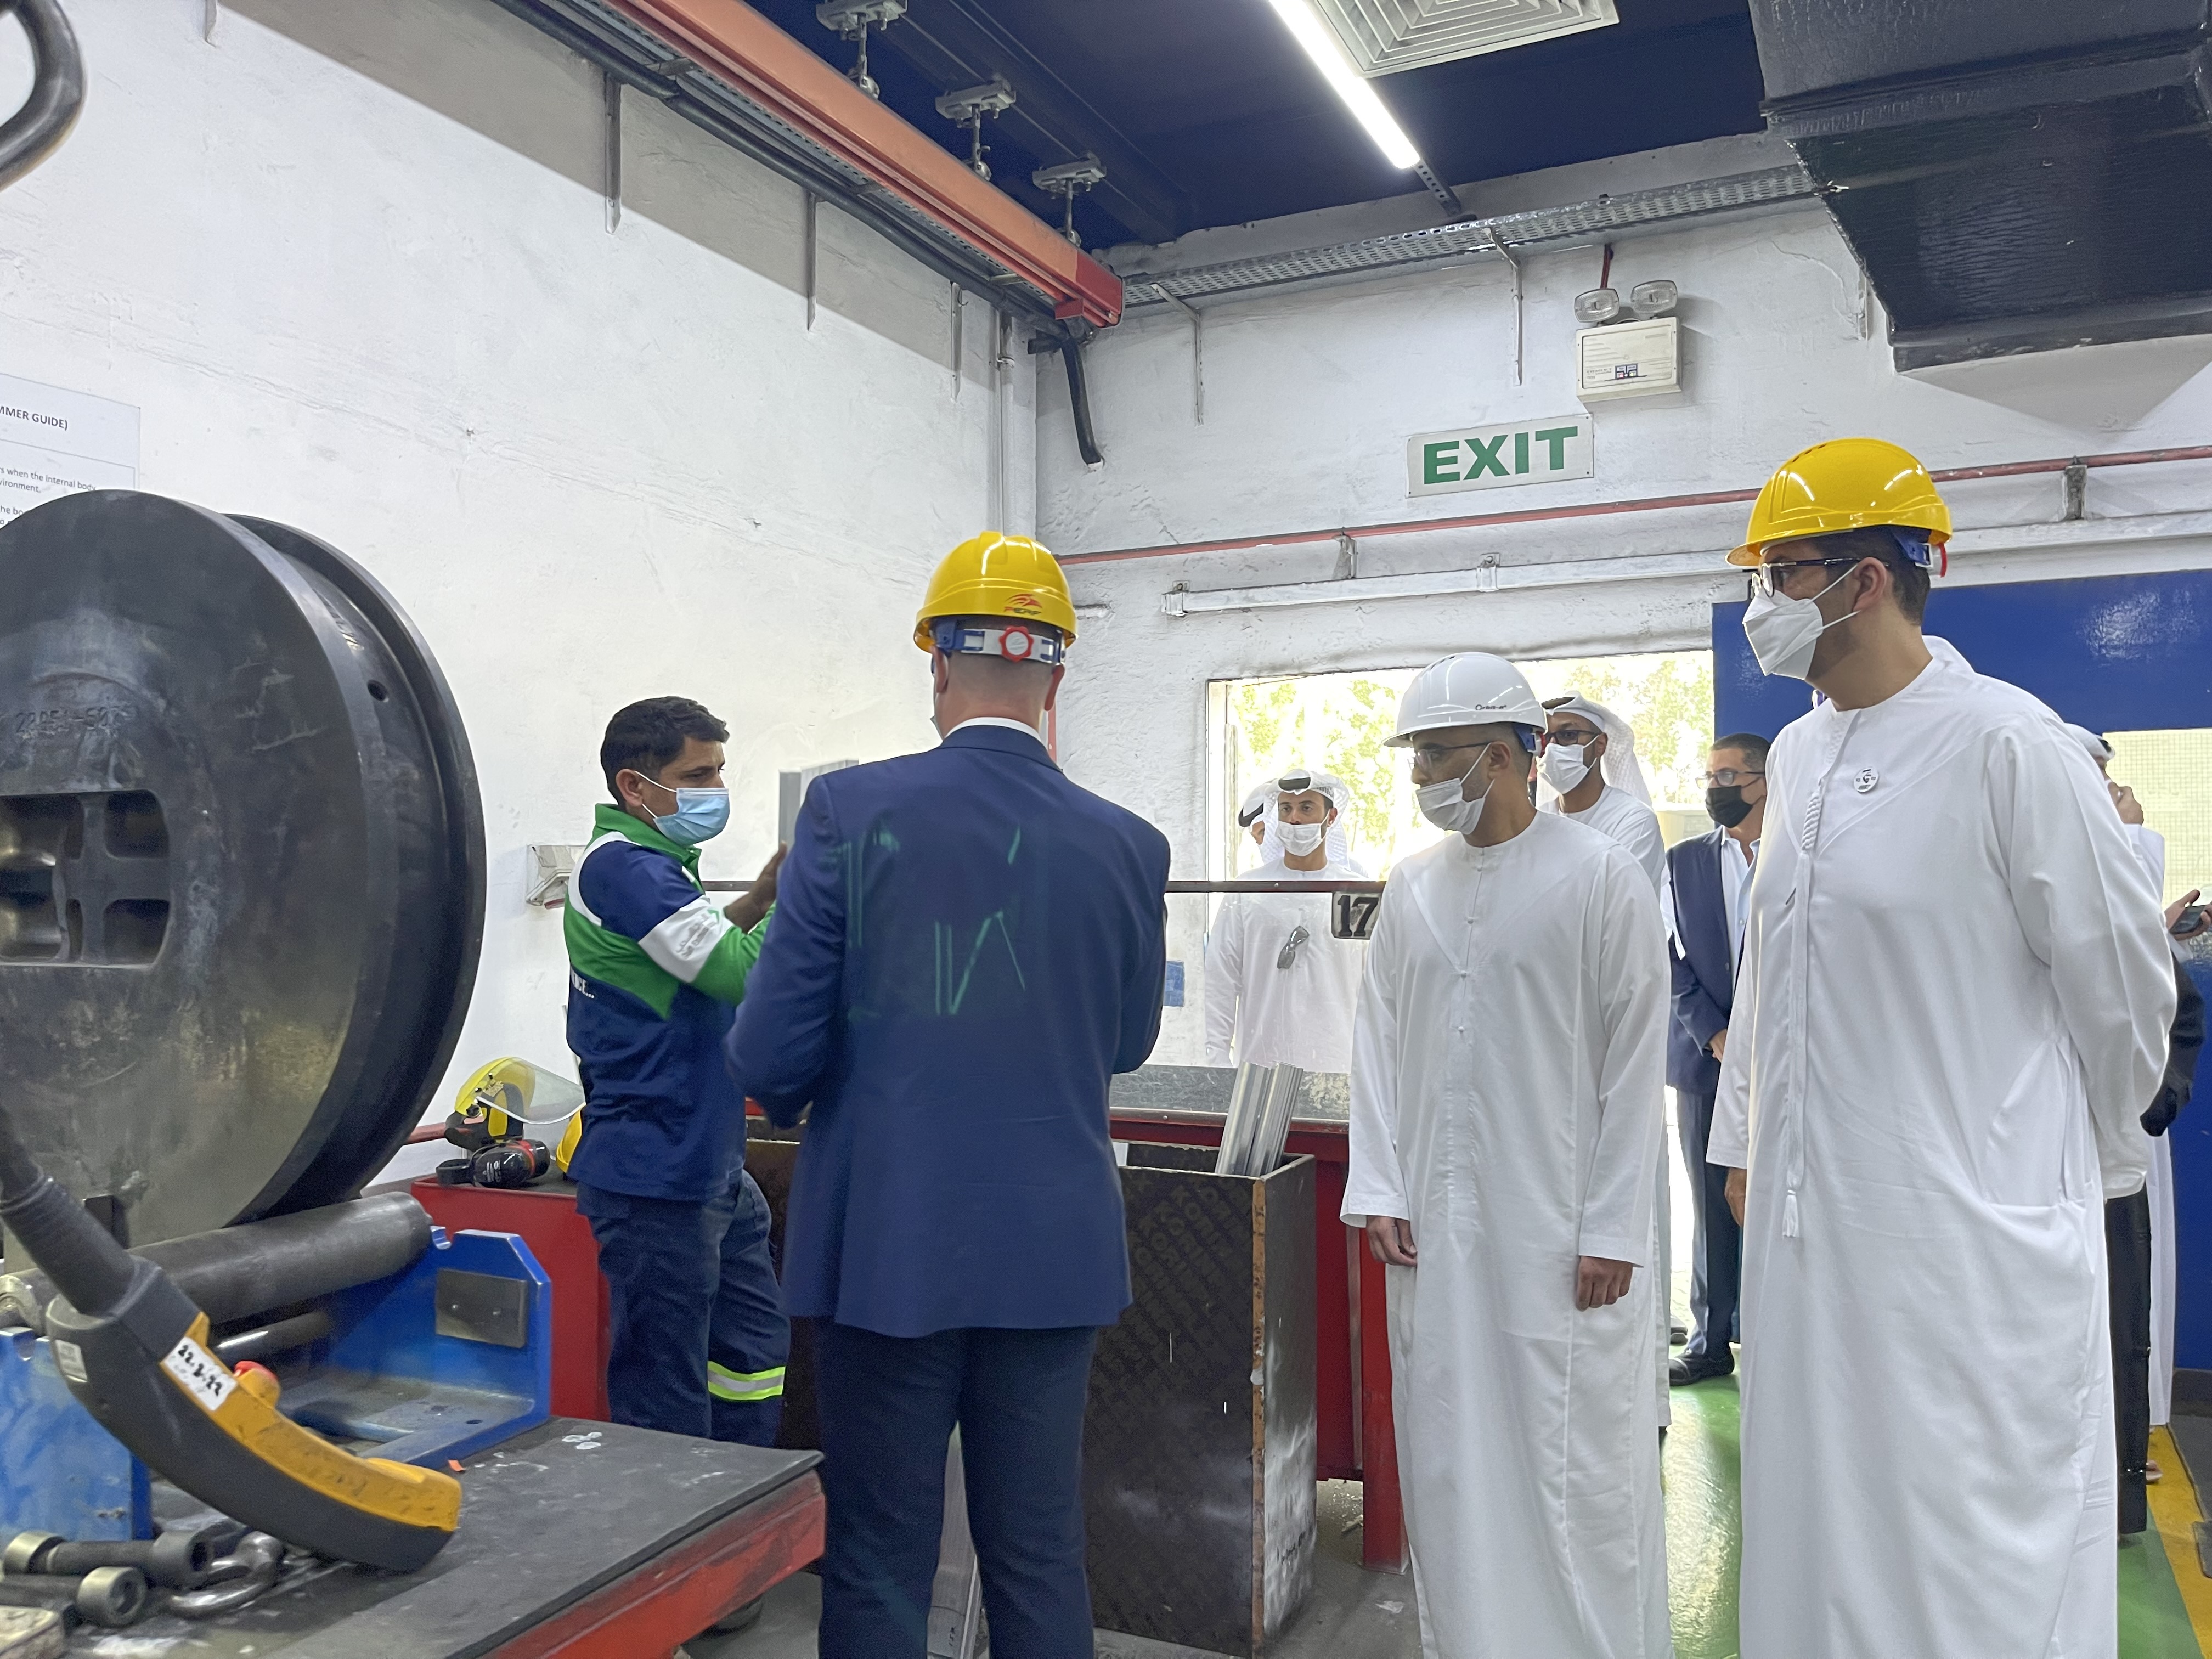 Sultan Al Jaber Visits Gulf Extrusions, one of the largest national aluminum extrusion factories in the Middle East